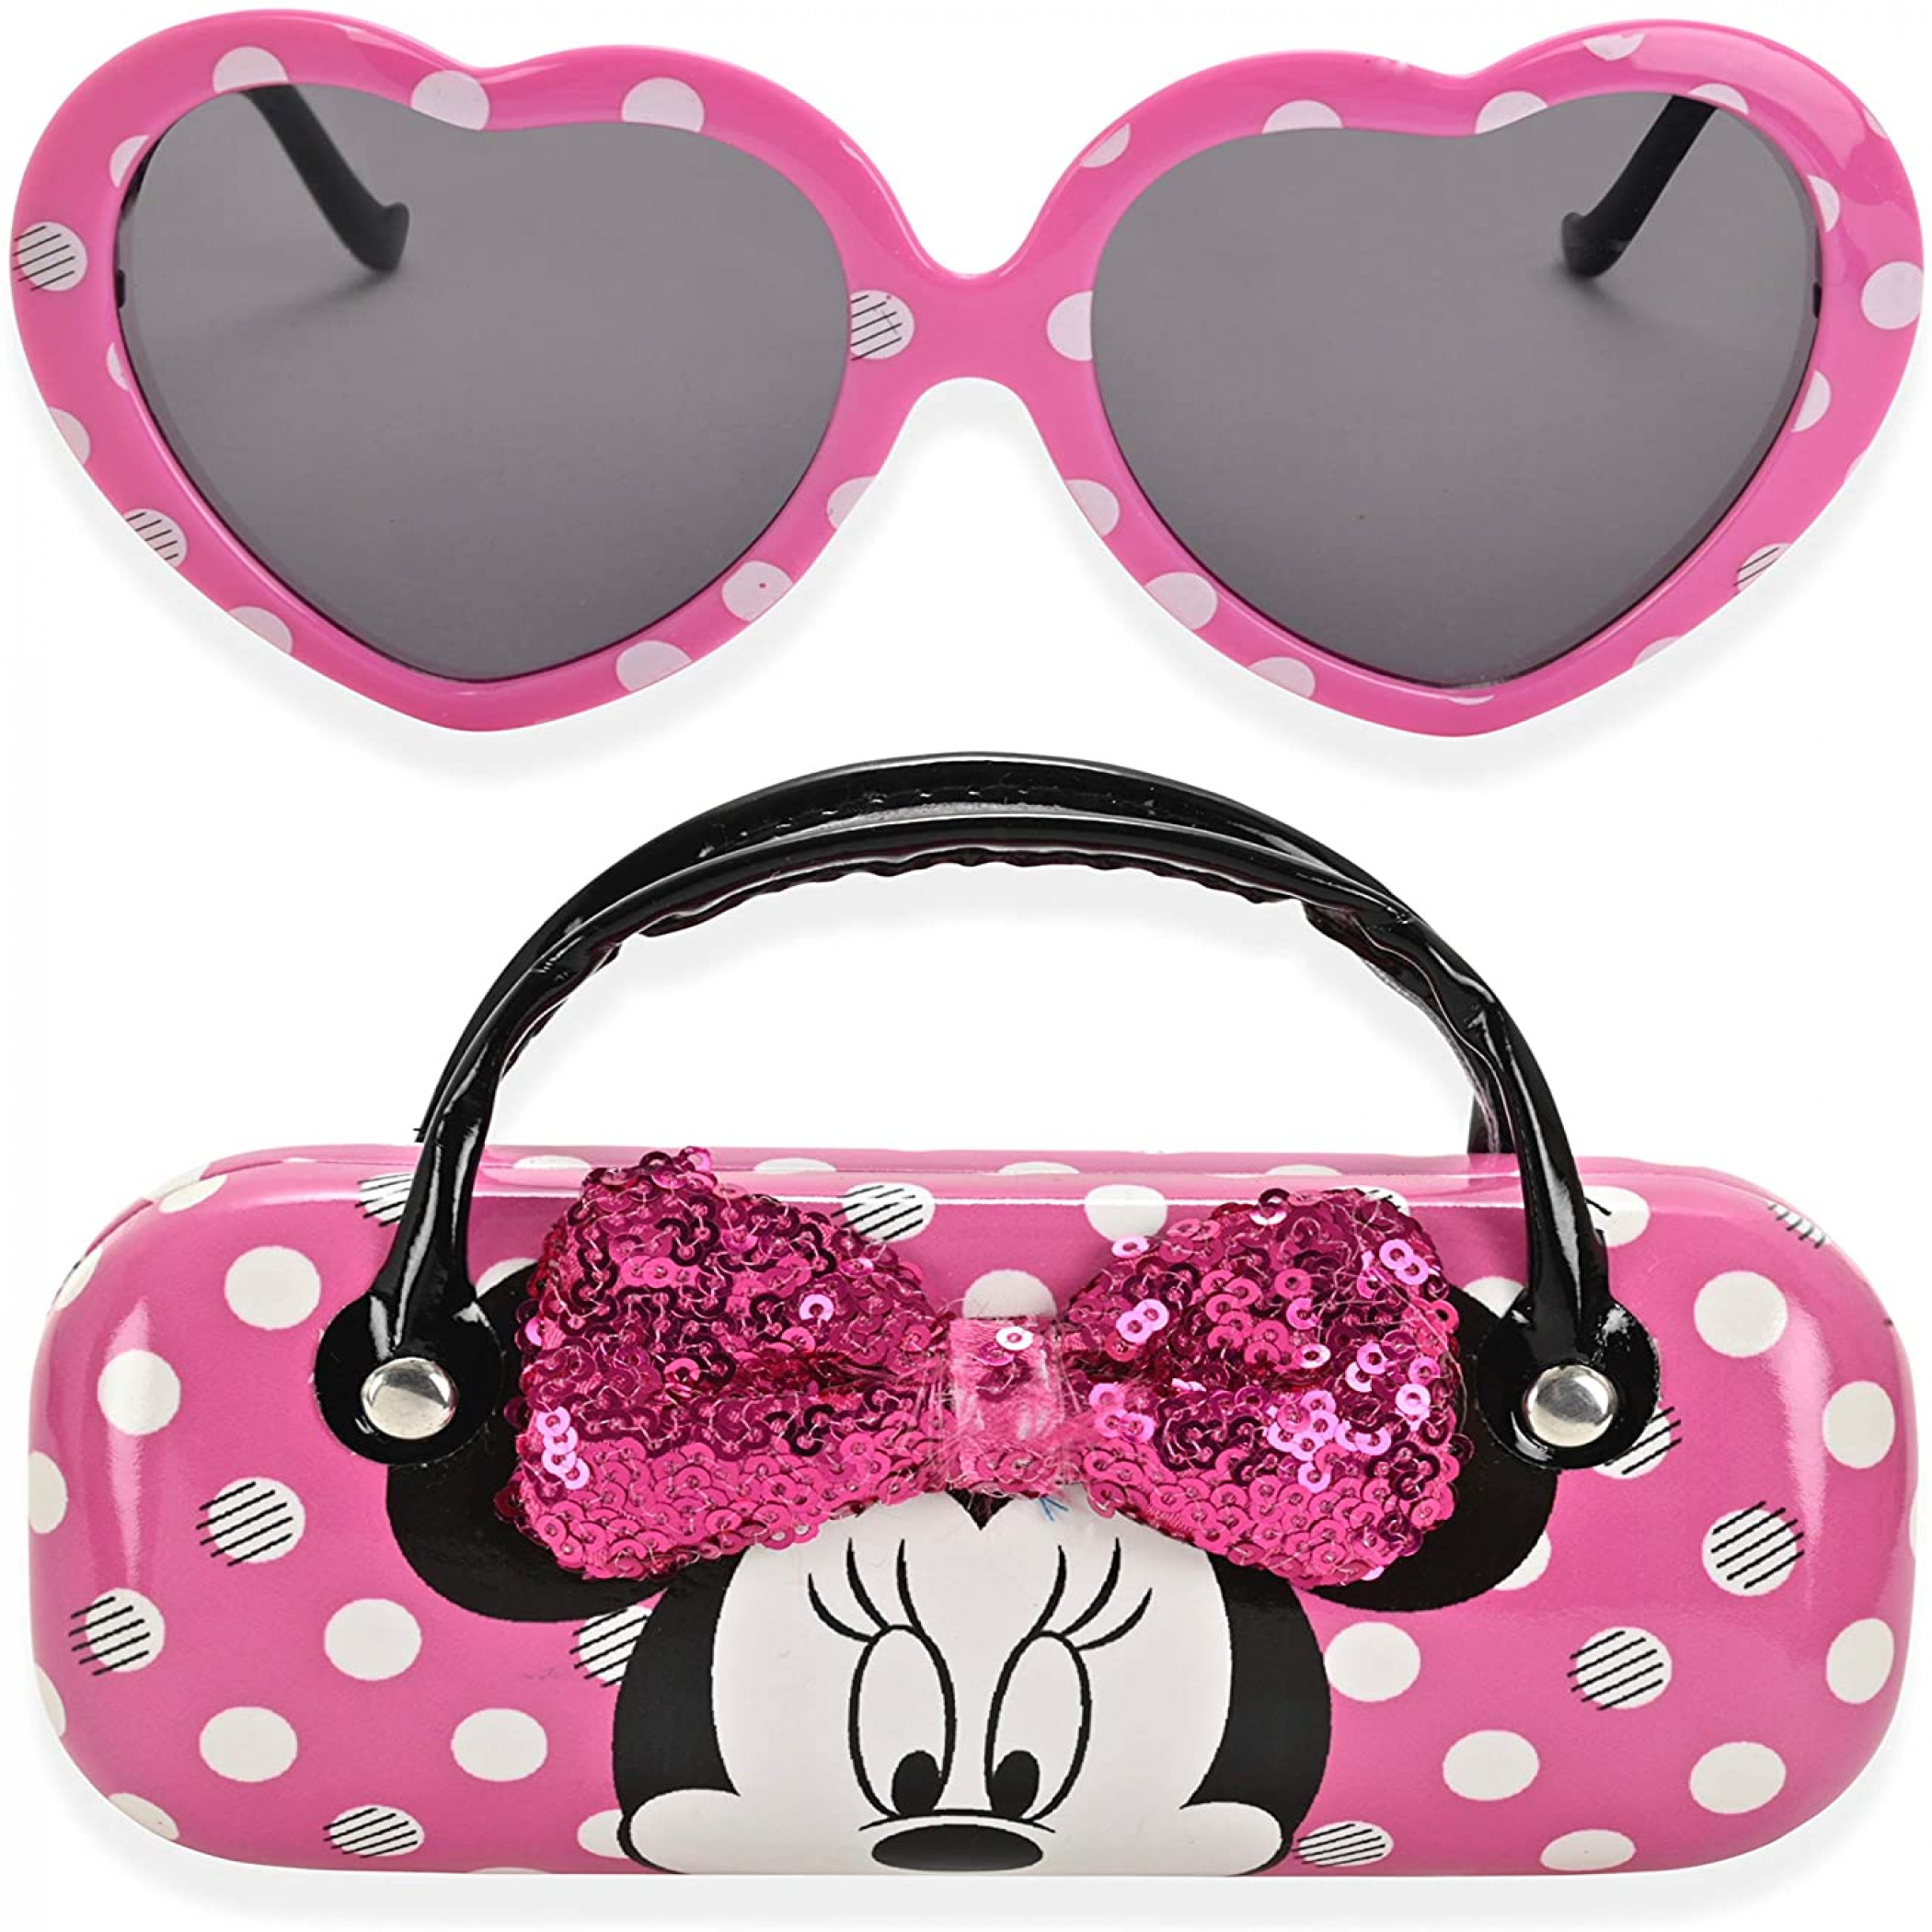 Disney Minnie Mouse Kid's Sunglasses with Handle Carrier Pouch